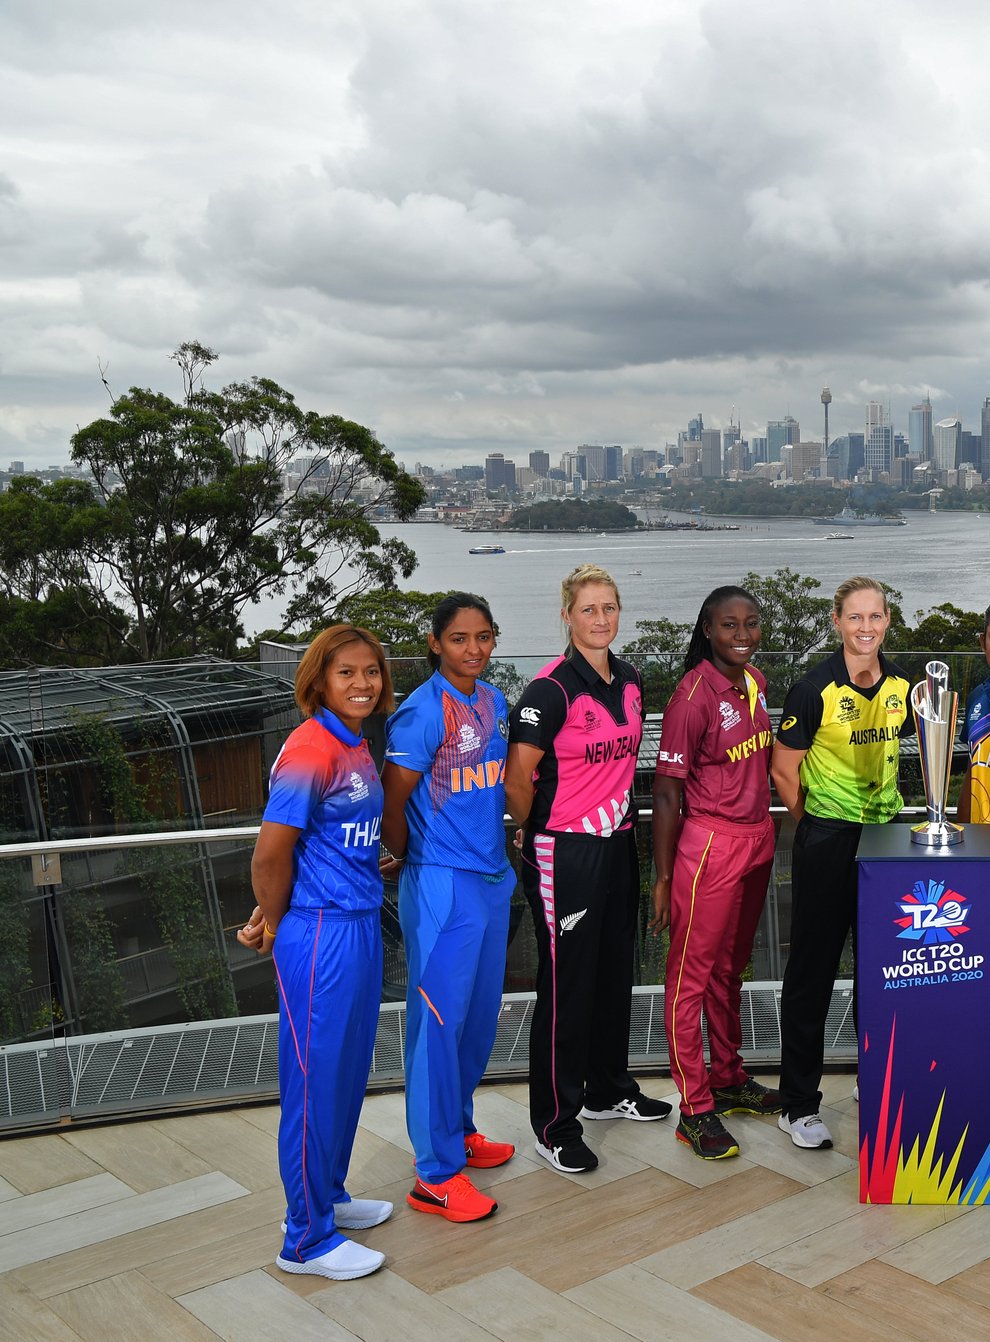 The captains all have their eyes on the trophy as they prepare to go into battle in Sydney (PA Images)